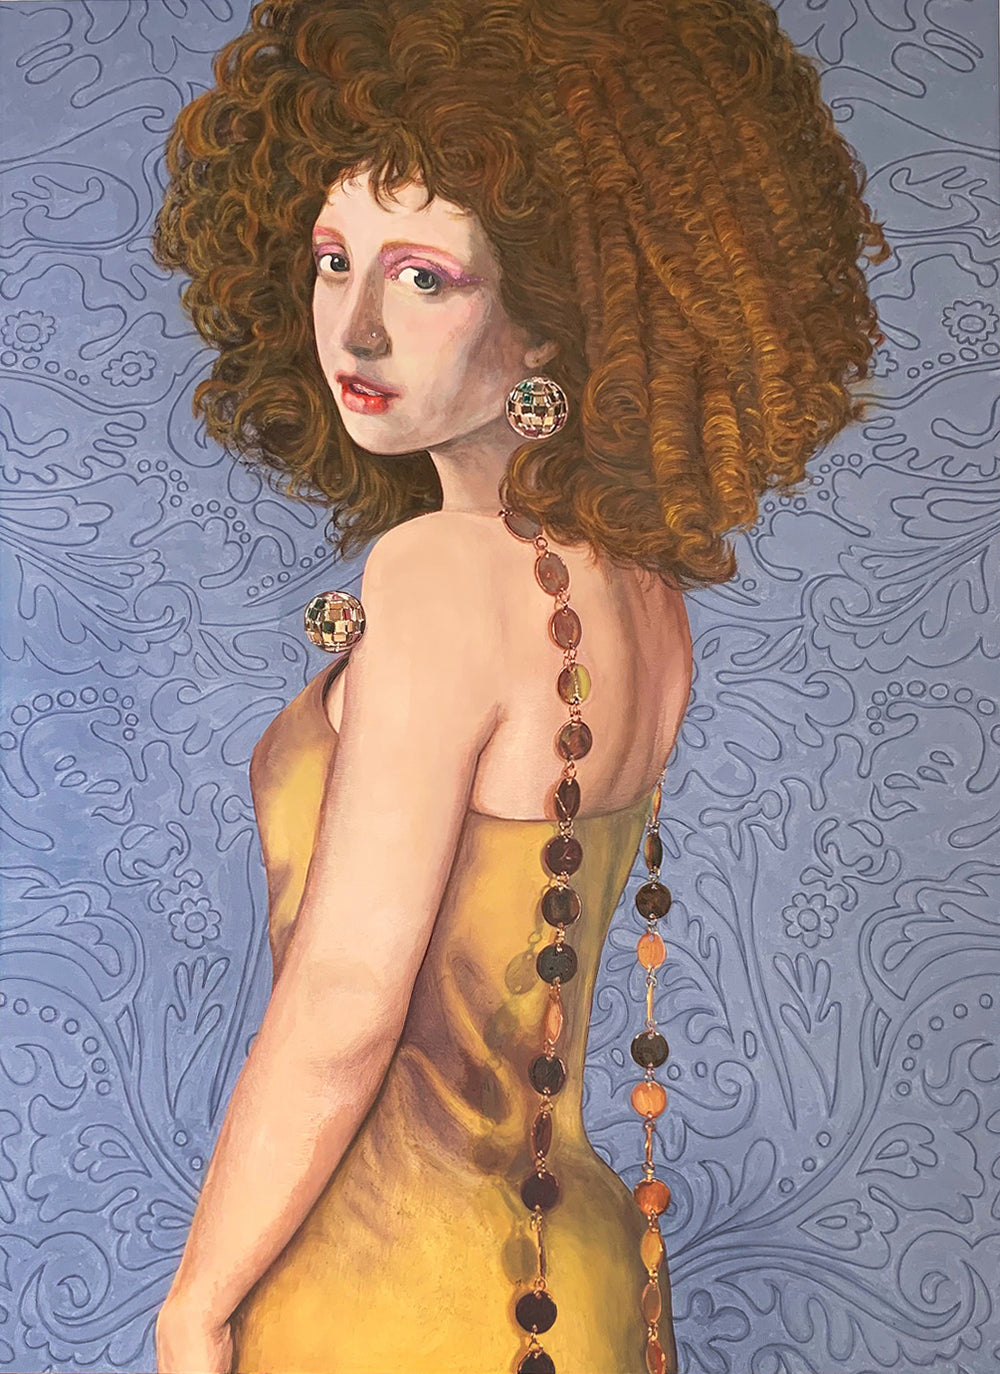 Painting of a woman with brown curls, who's wearing a yellow dress.